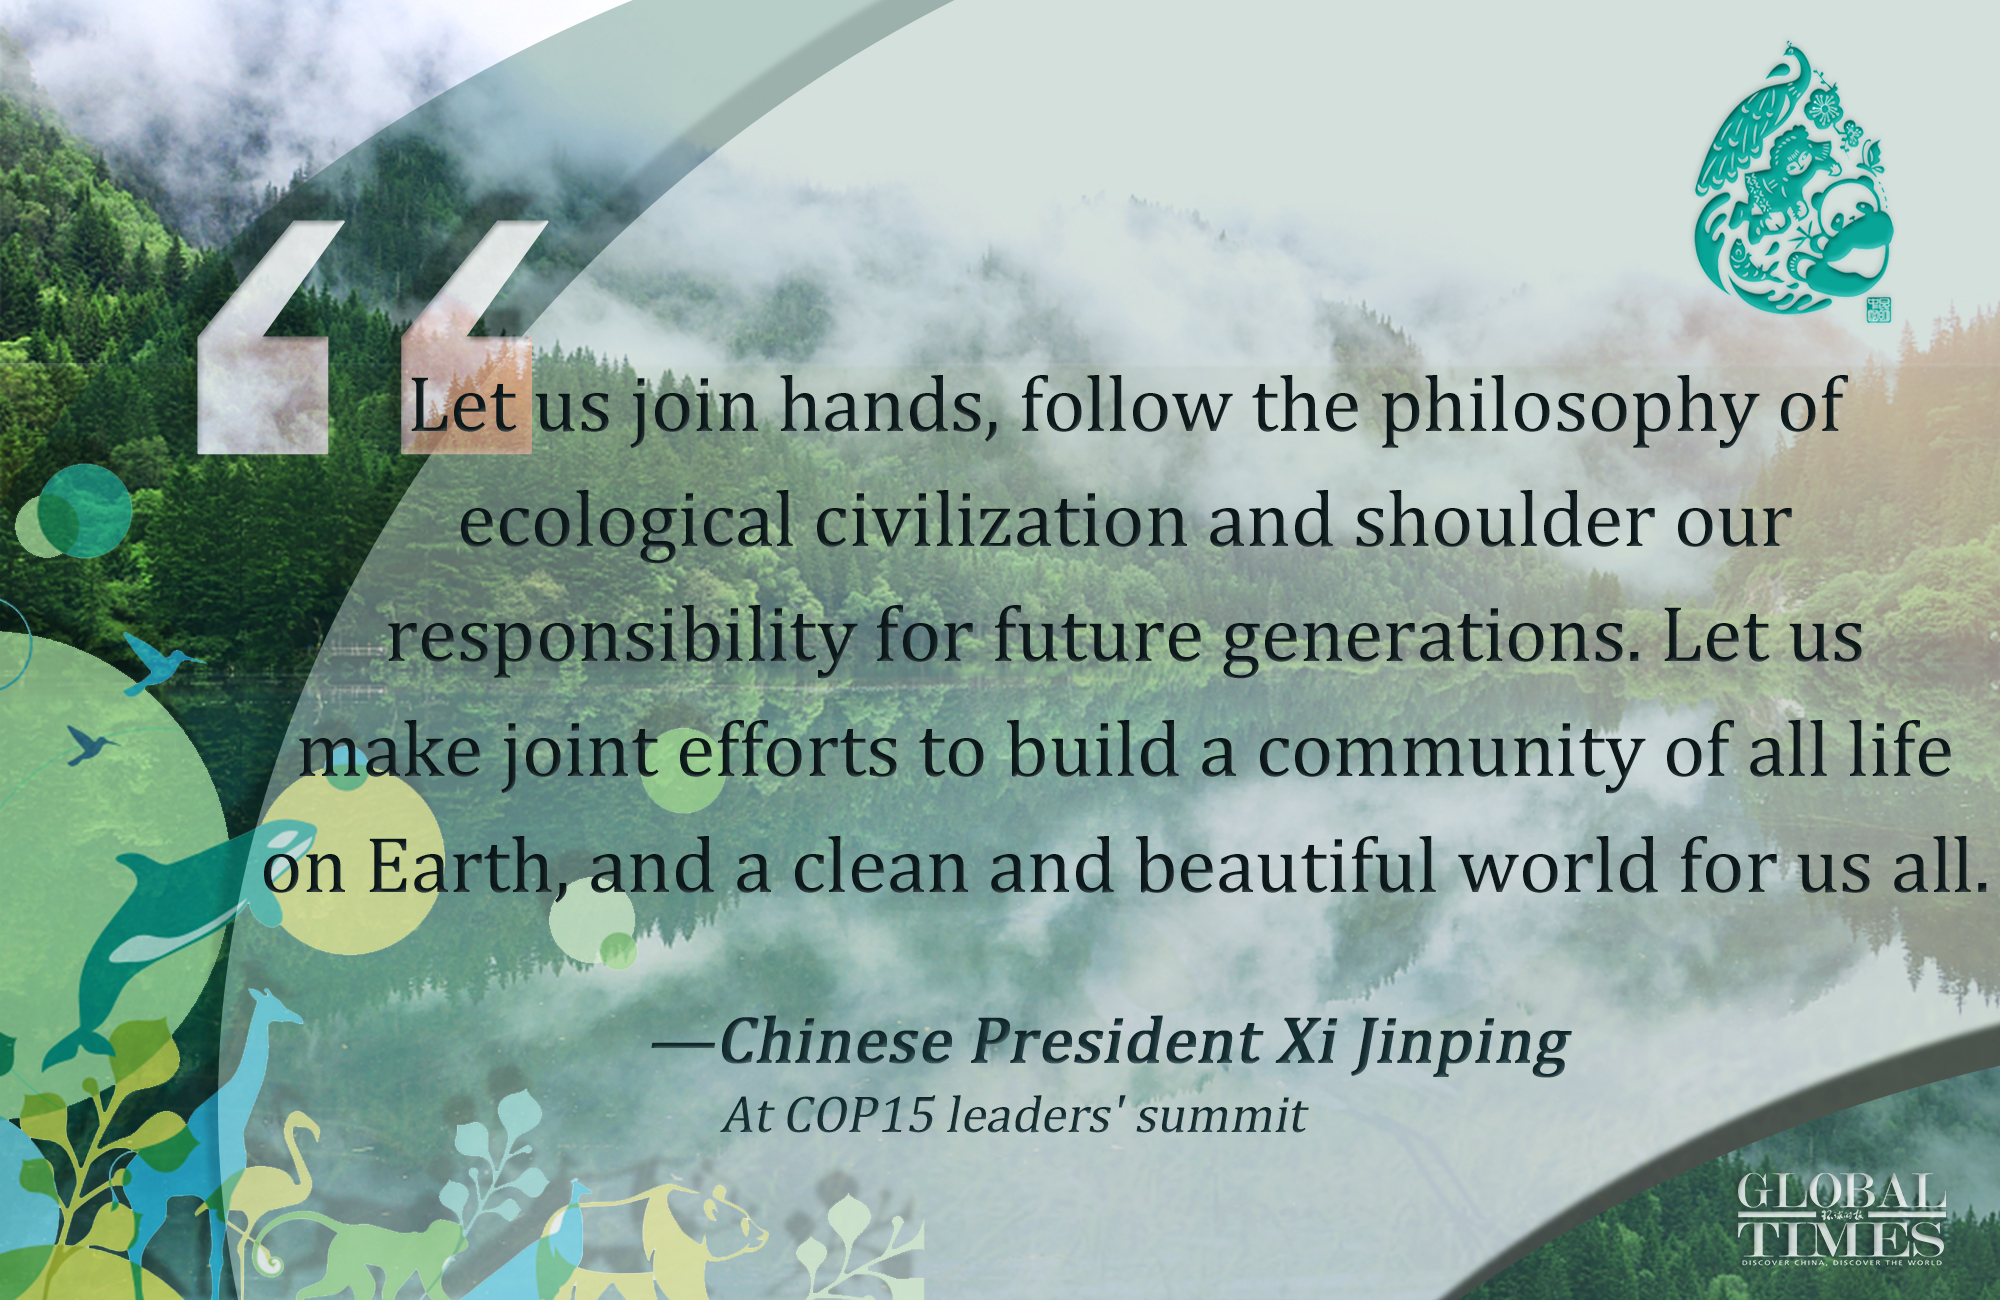 Highlights of Xi’ speech at COP15 leaders' summit Graphic: Yu Tianjiao/GT